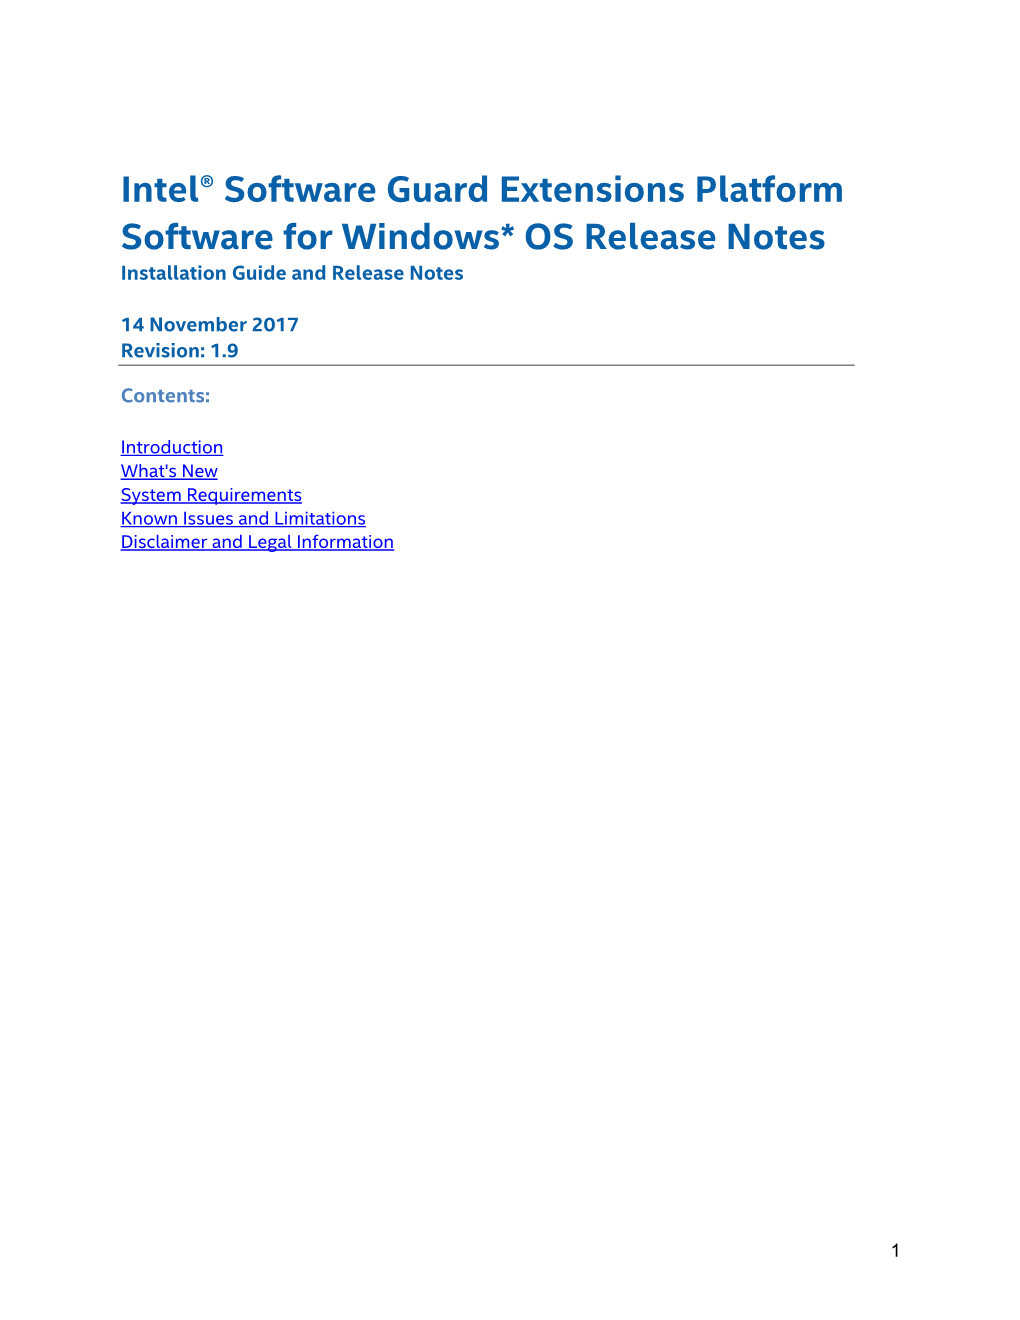 Intel® Software Guard Extensions PSW Release Notes for Windows* OS